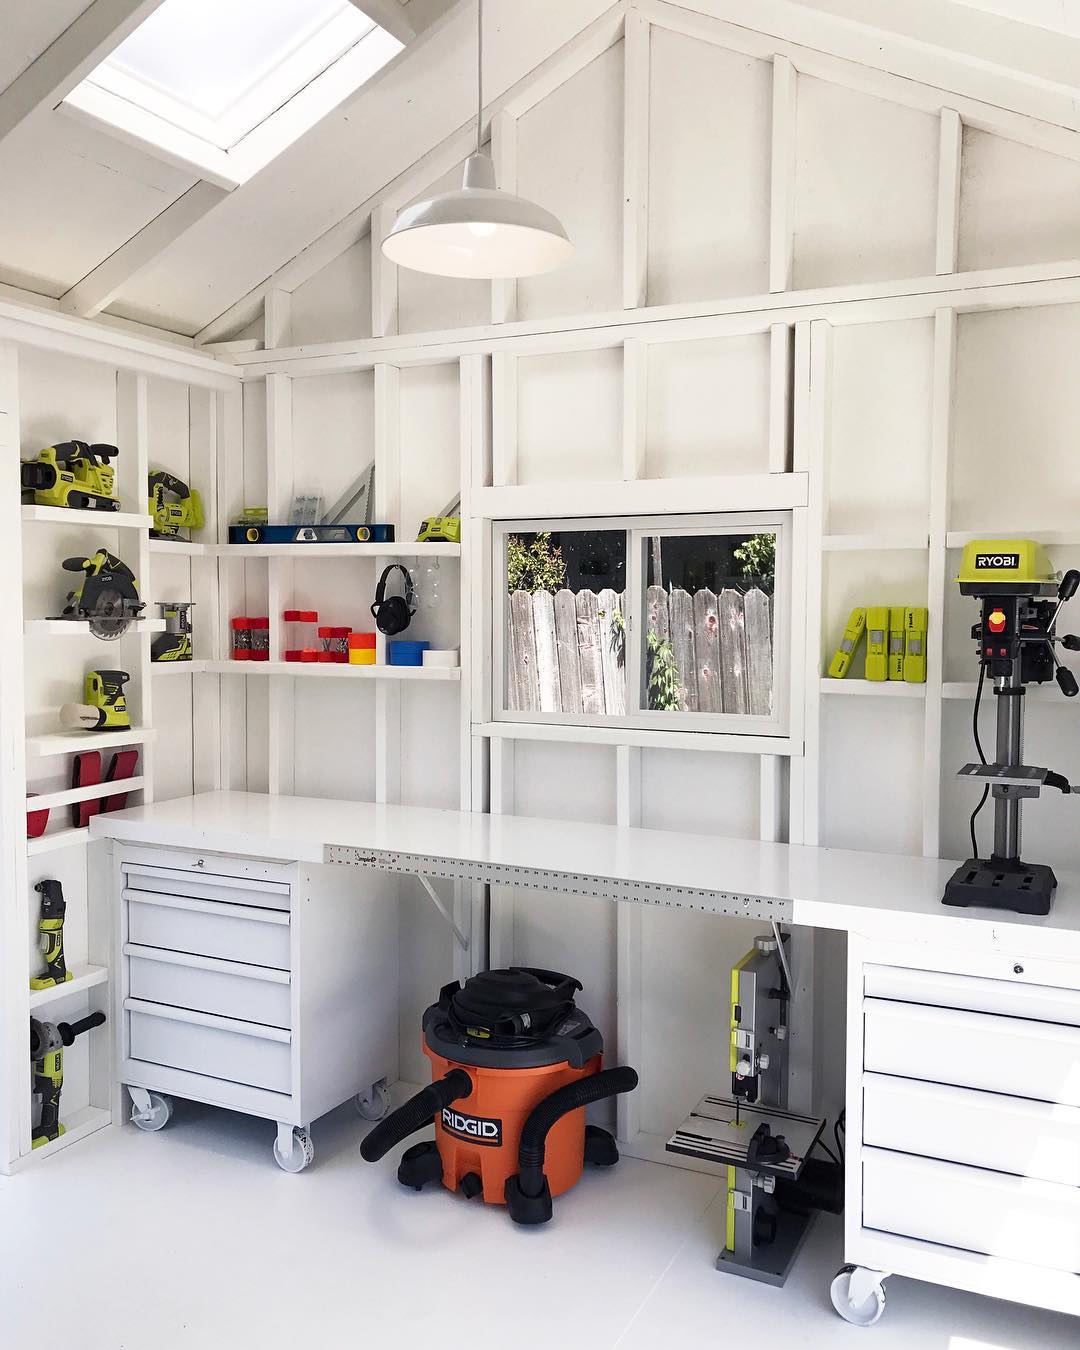 26 Outdoor Shed Organization Storage, Storage Shed Shelving Ideas